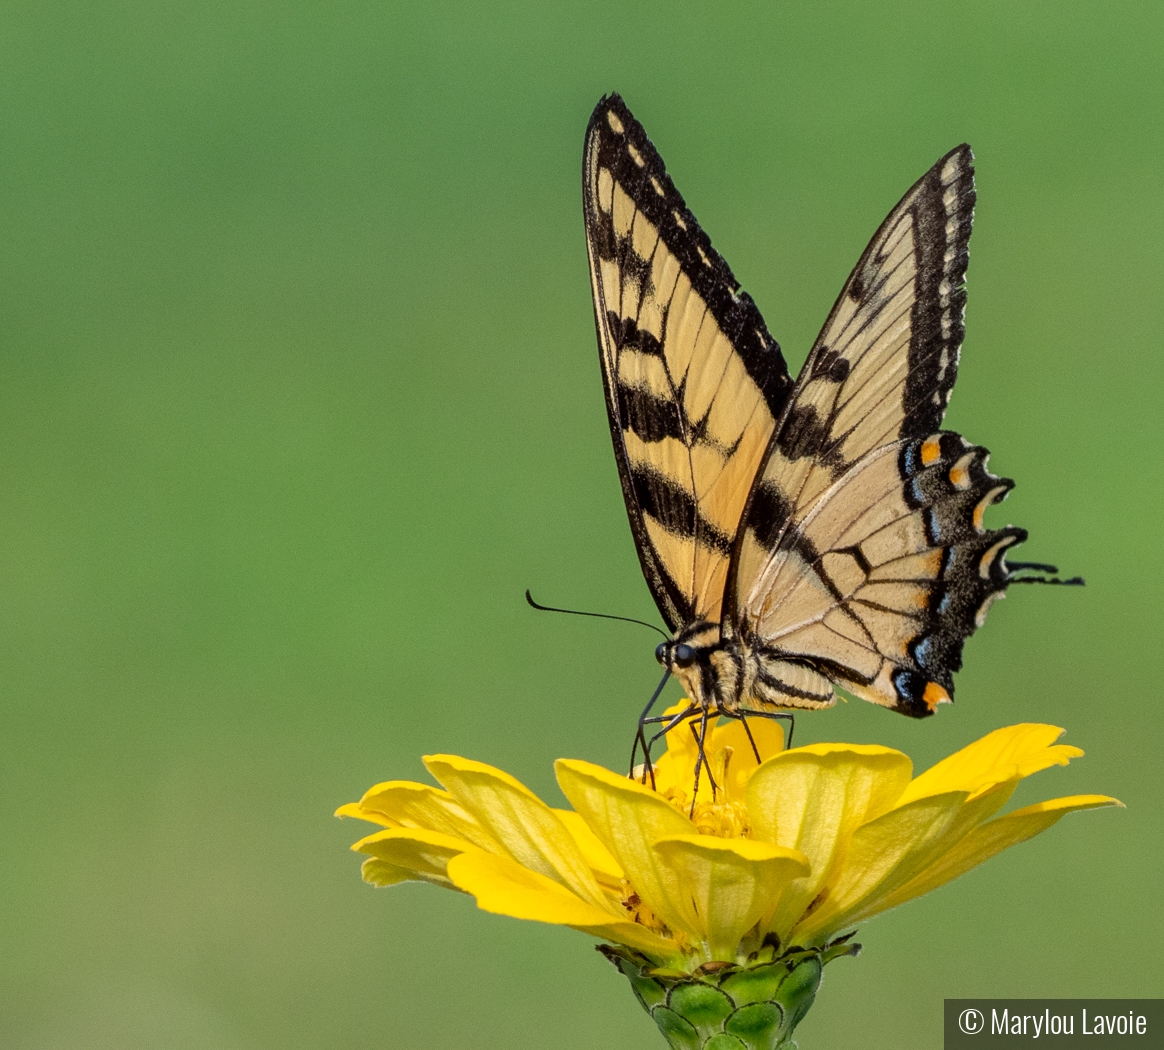 Swallowtail at Auer Farm by Marylou Lavoie